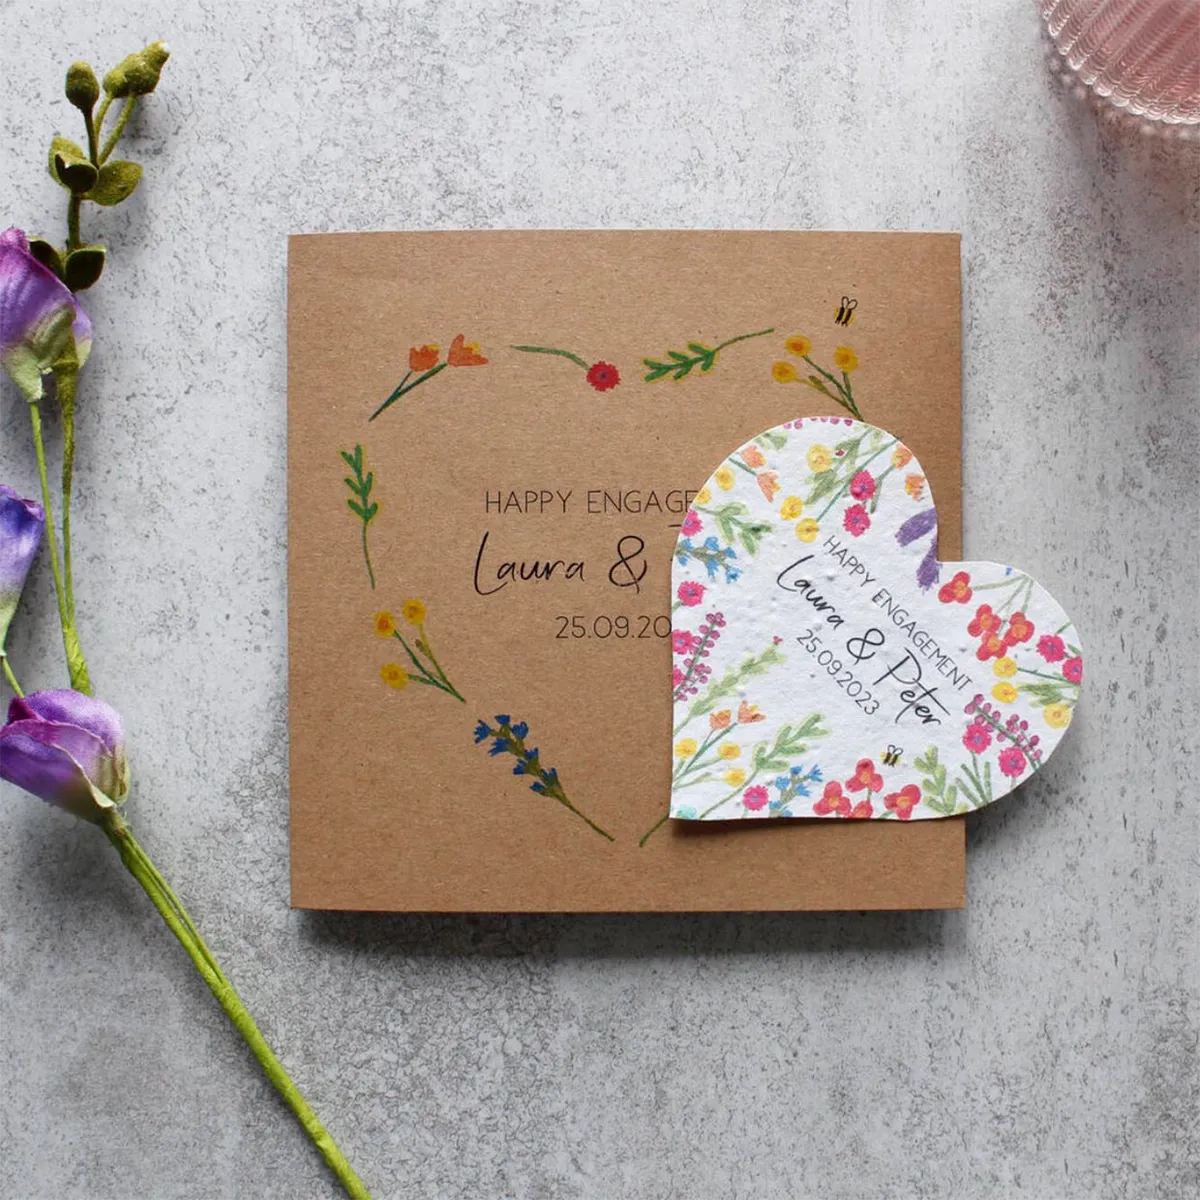 Wild seed heart card from Not On The High Street